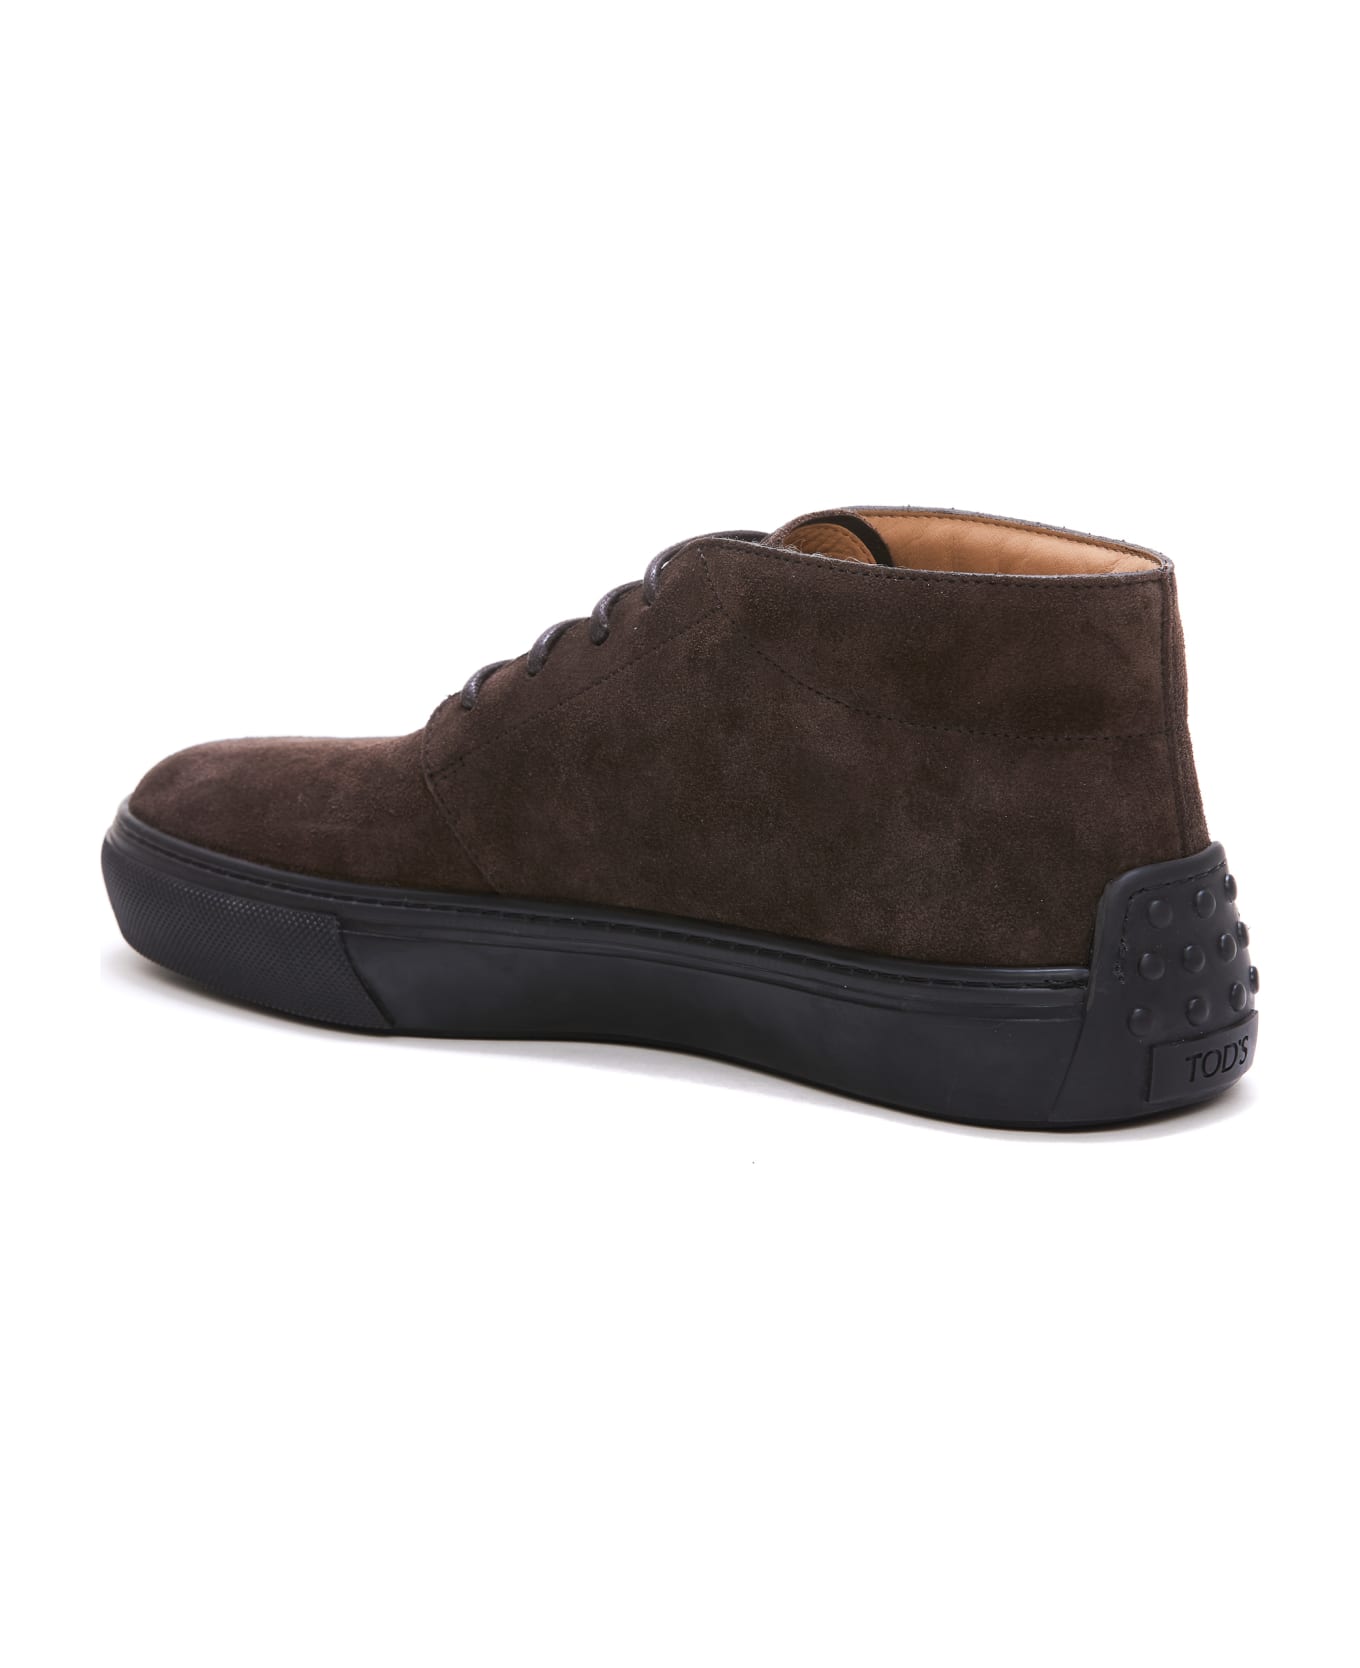 Tod's Ankle Boots - Testa moro